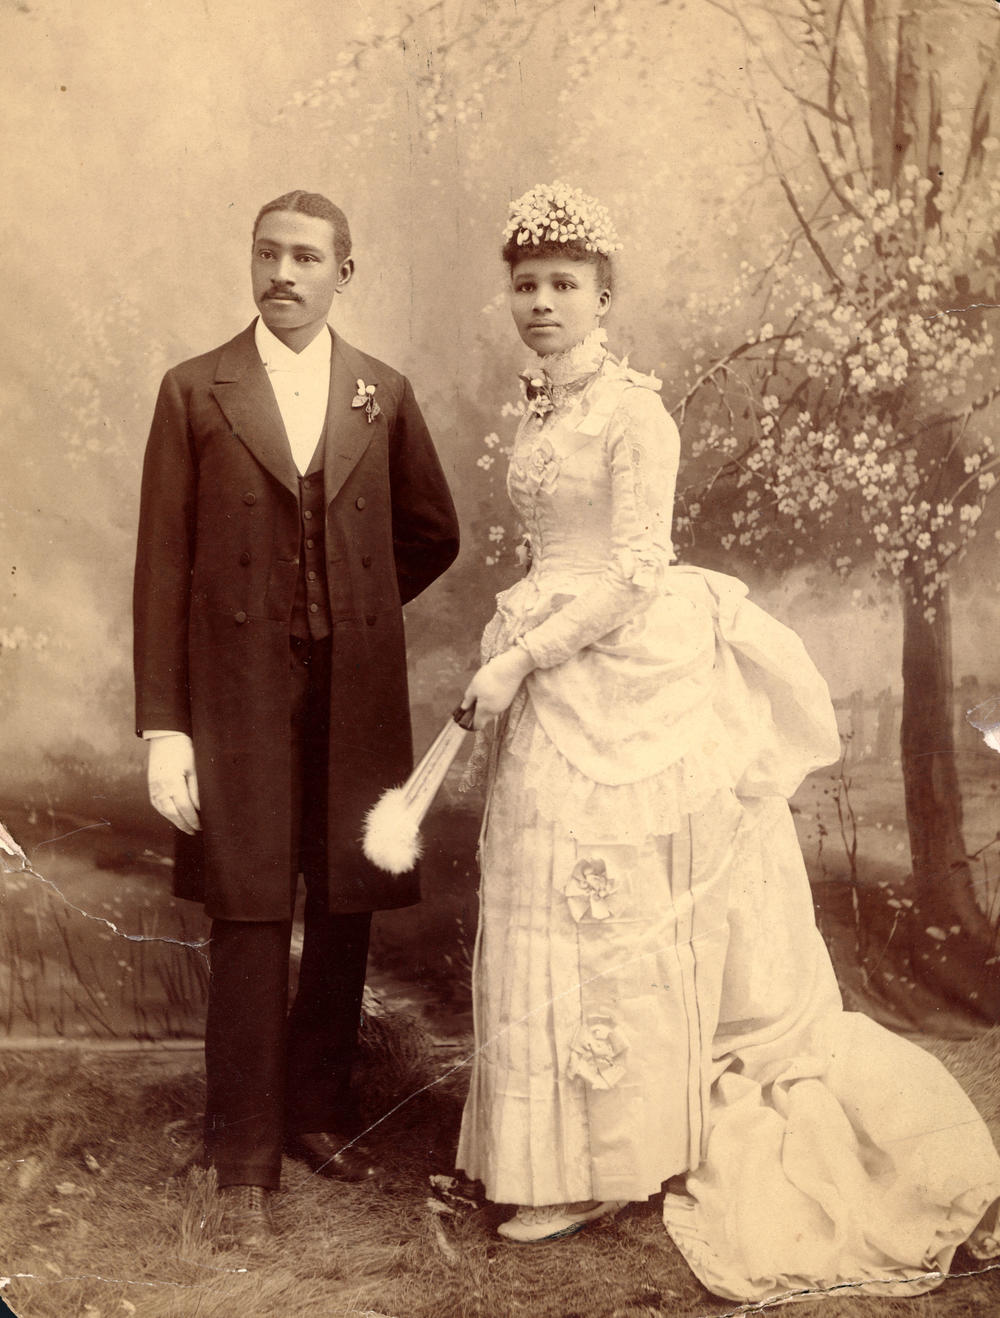 Wedding portrait of Charles Aaron and Willa A. Bruce.